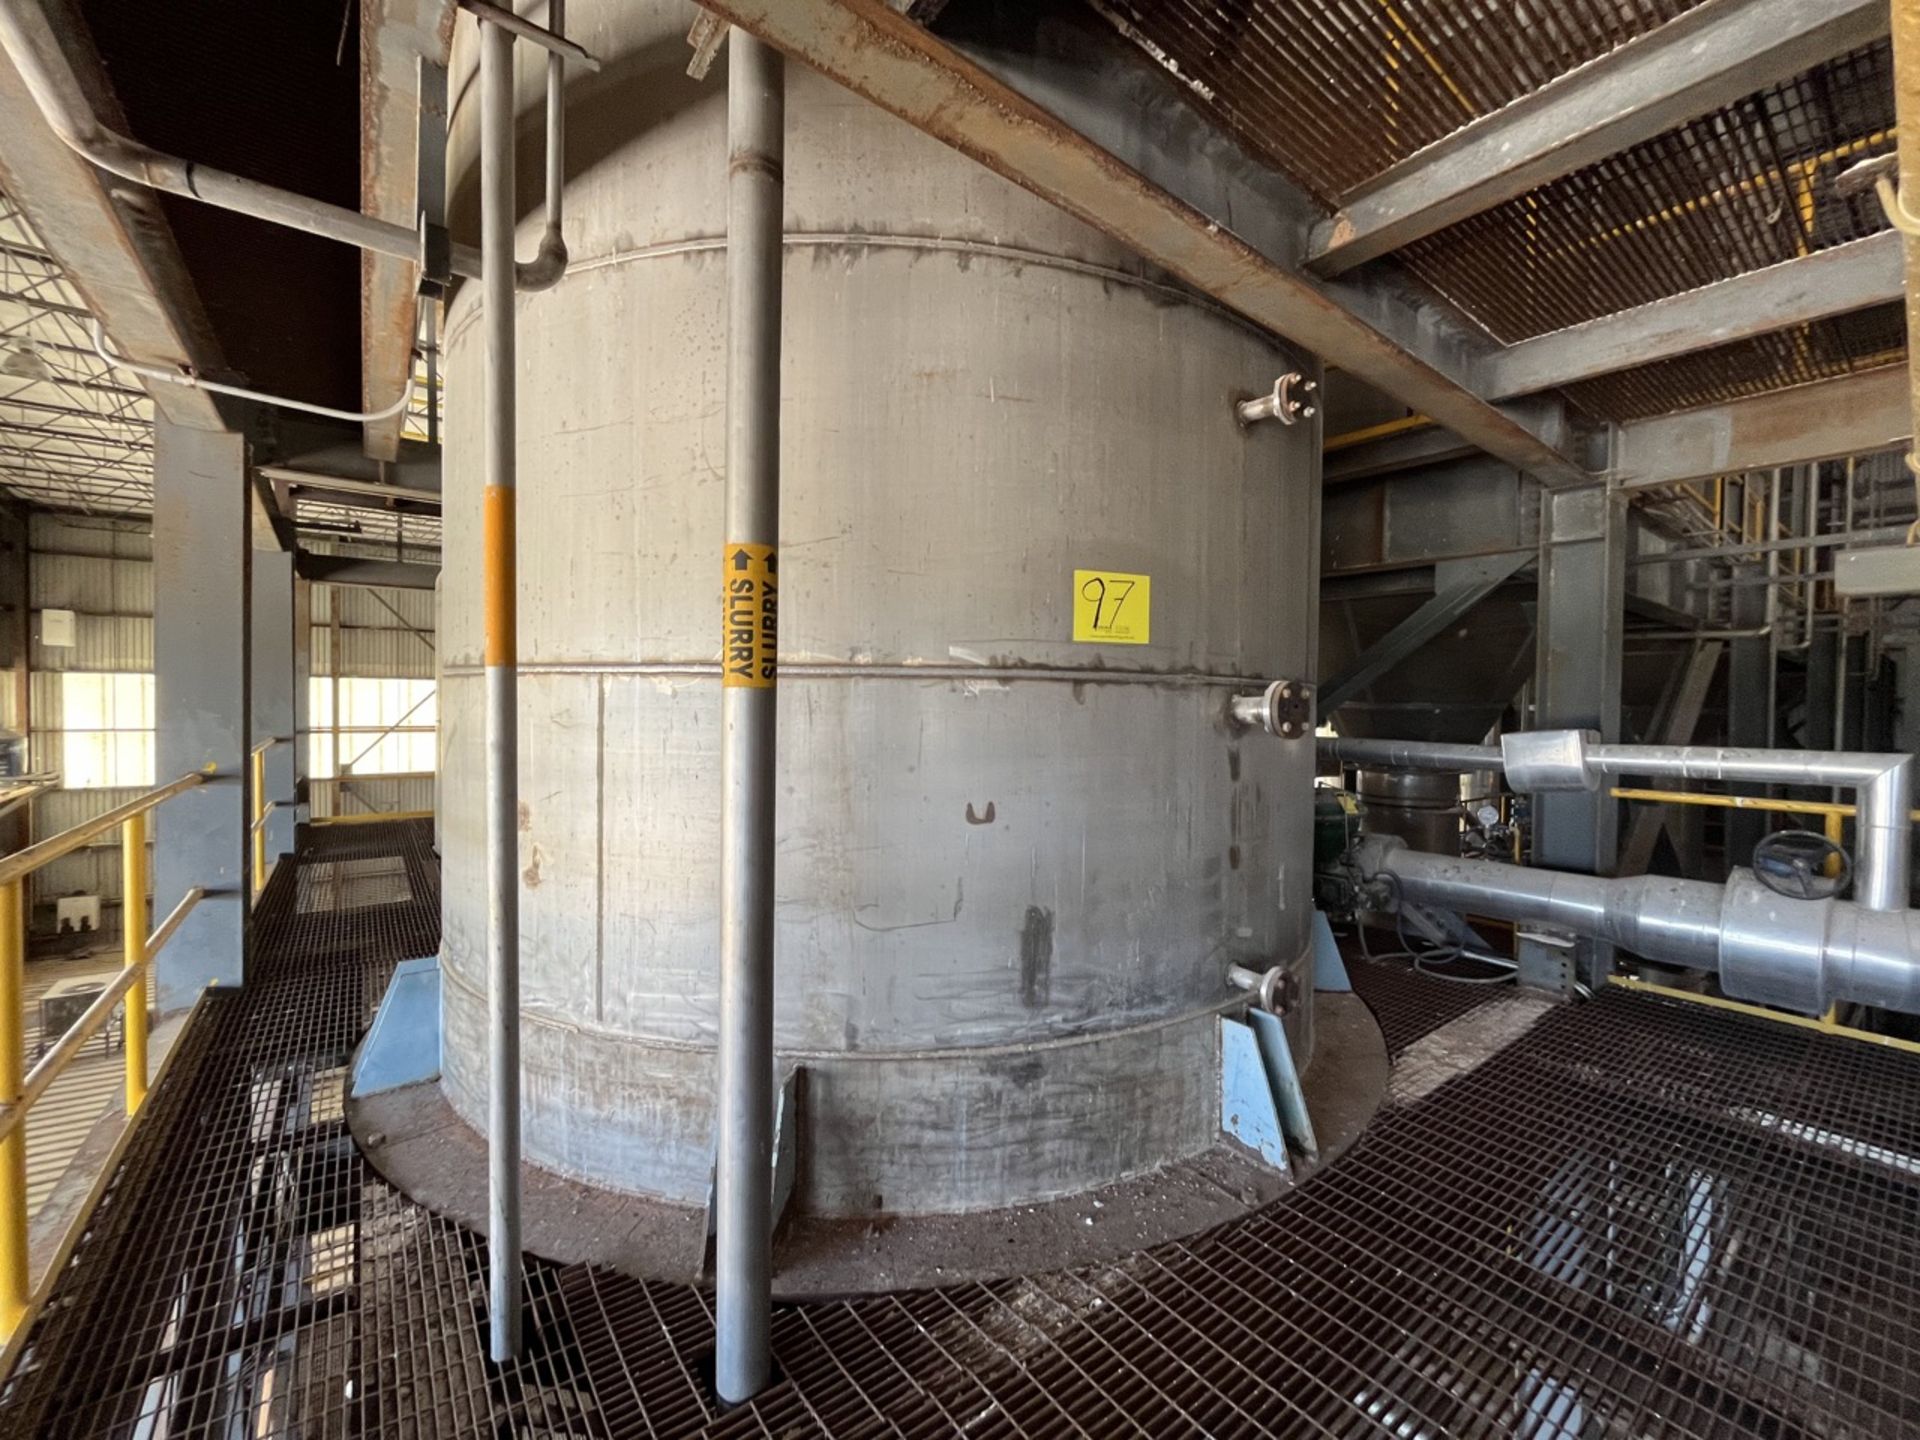 Conical storage tank with stainless steel toriesferica lid measures approximately 4.30 meters in di - Bild 4 aus 37